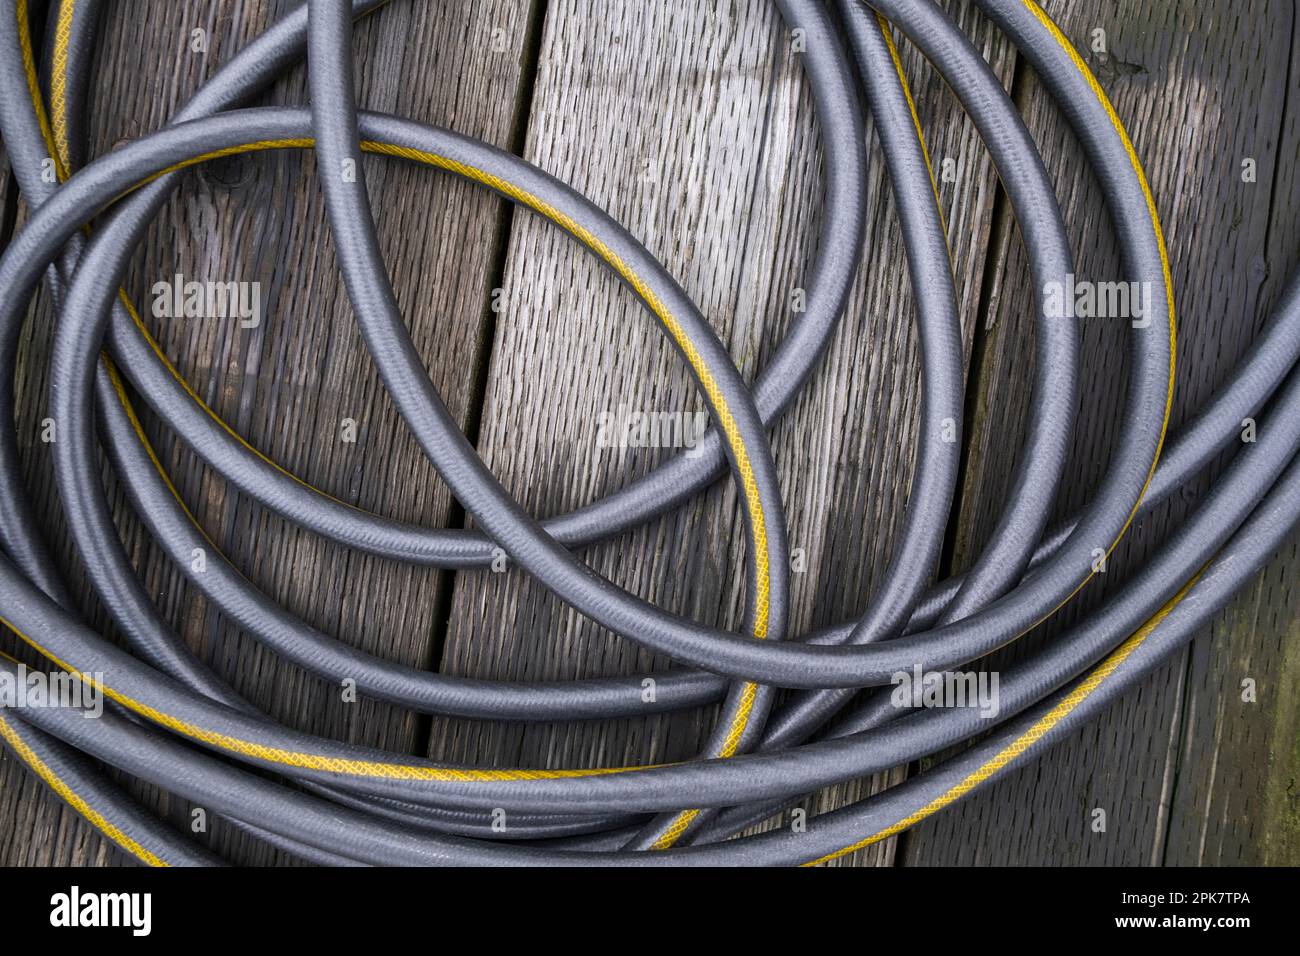 A coiled water hose. Stock Photo